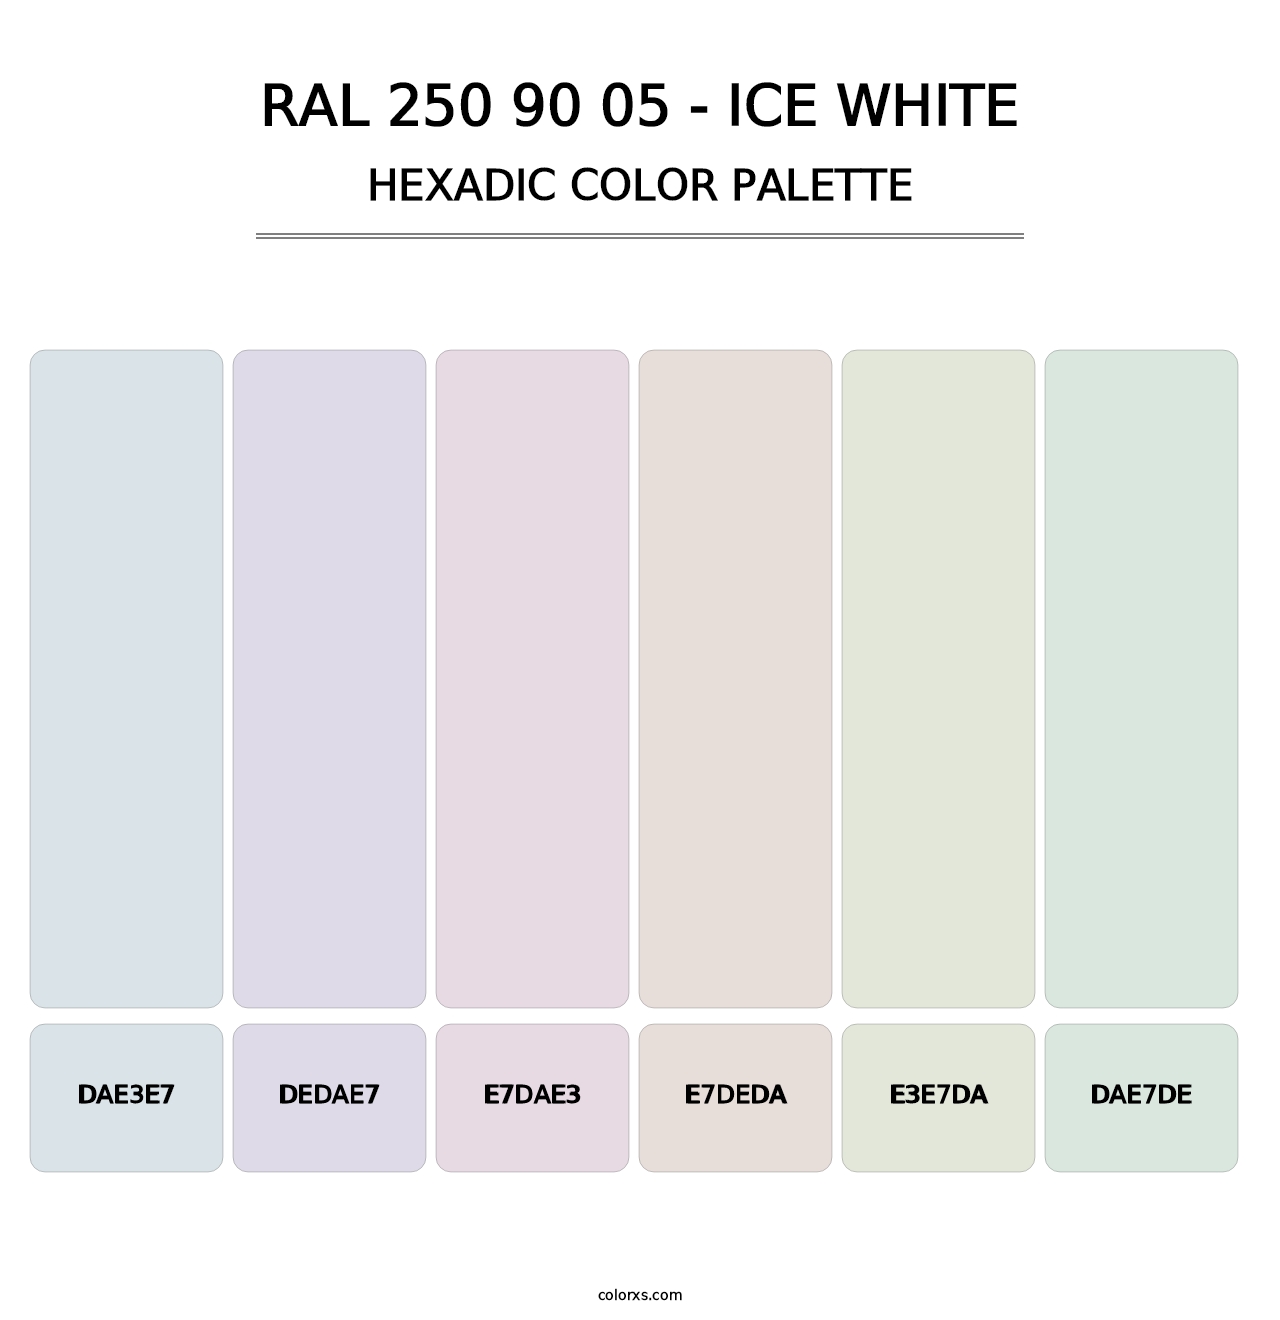 RAL 250 90 05 - Ice White - Hexadic Color Palette